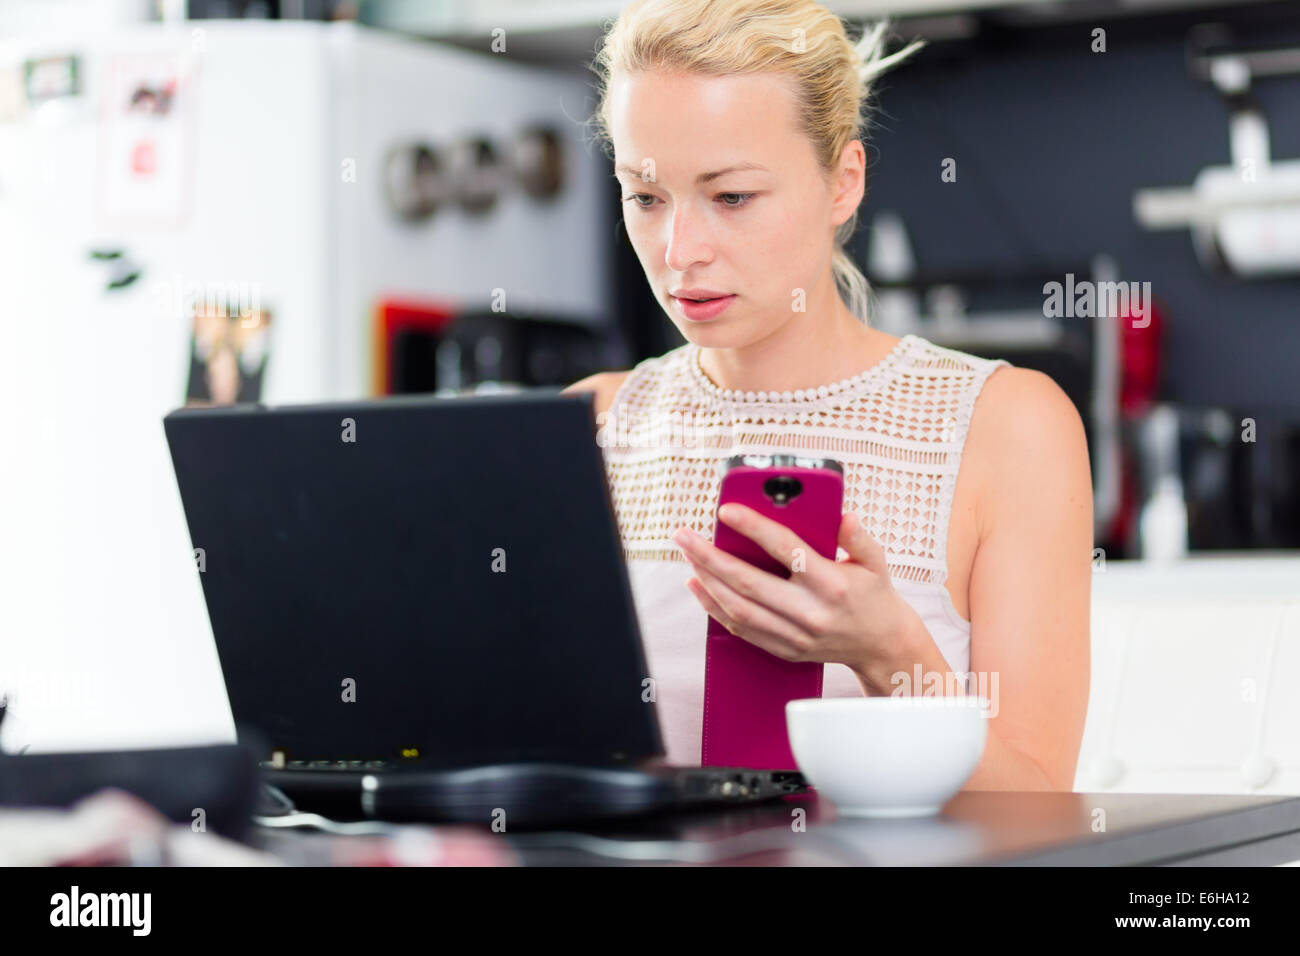 Business woman working from home. Stock Photo